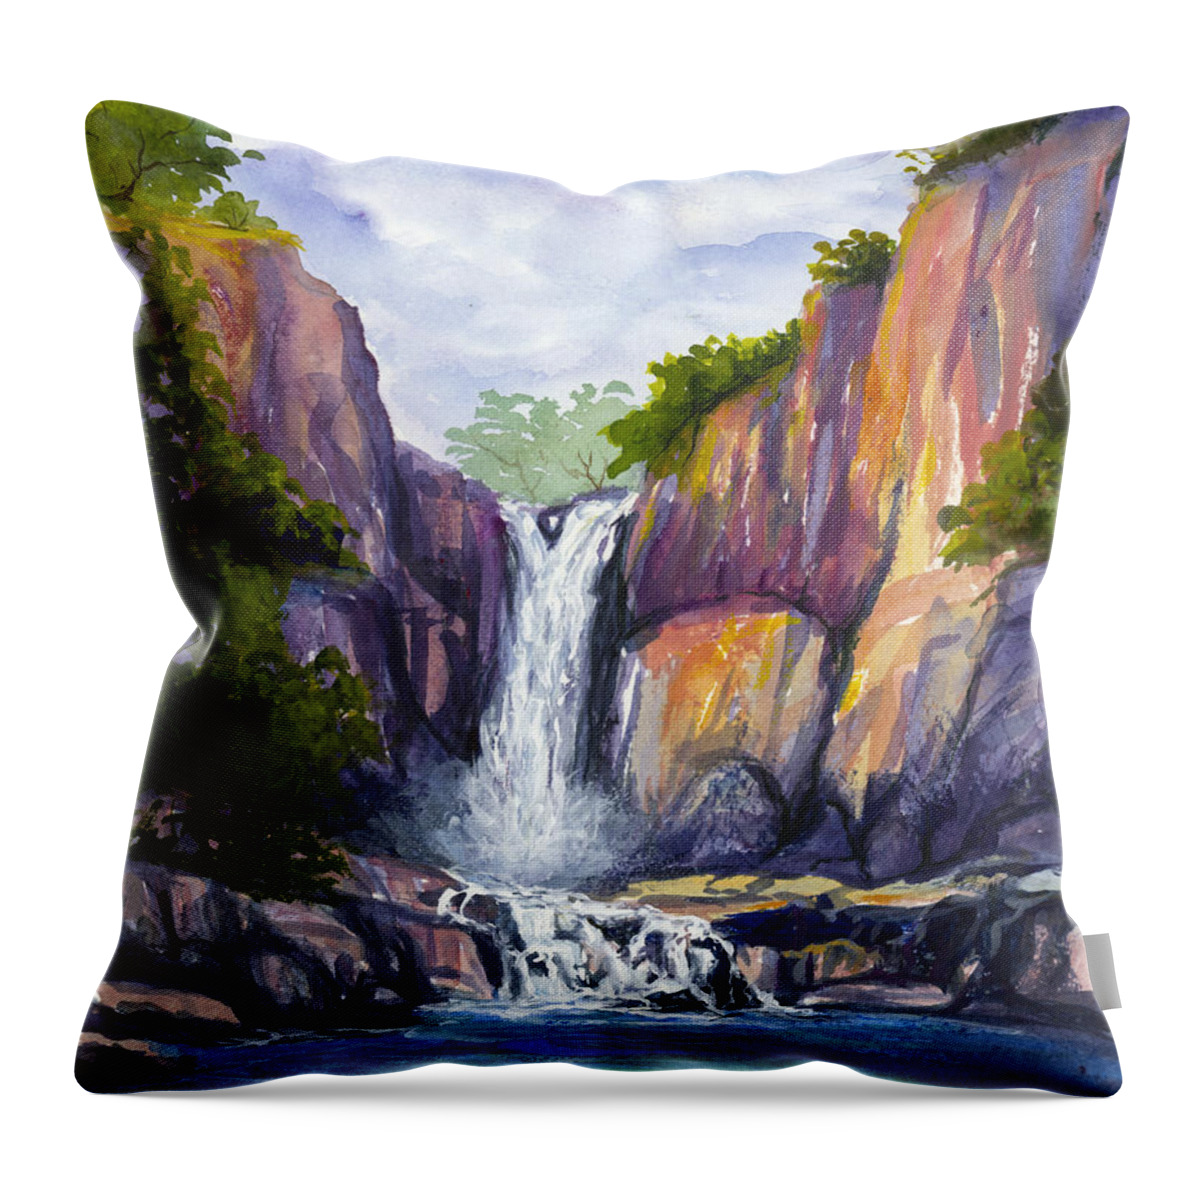 Maui Throw Pillow featuring the painting Maui Waterfall by Darice Machel McGuire